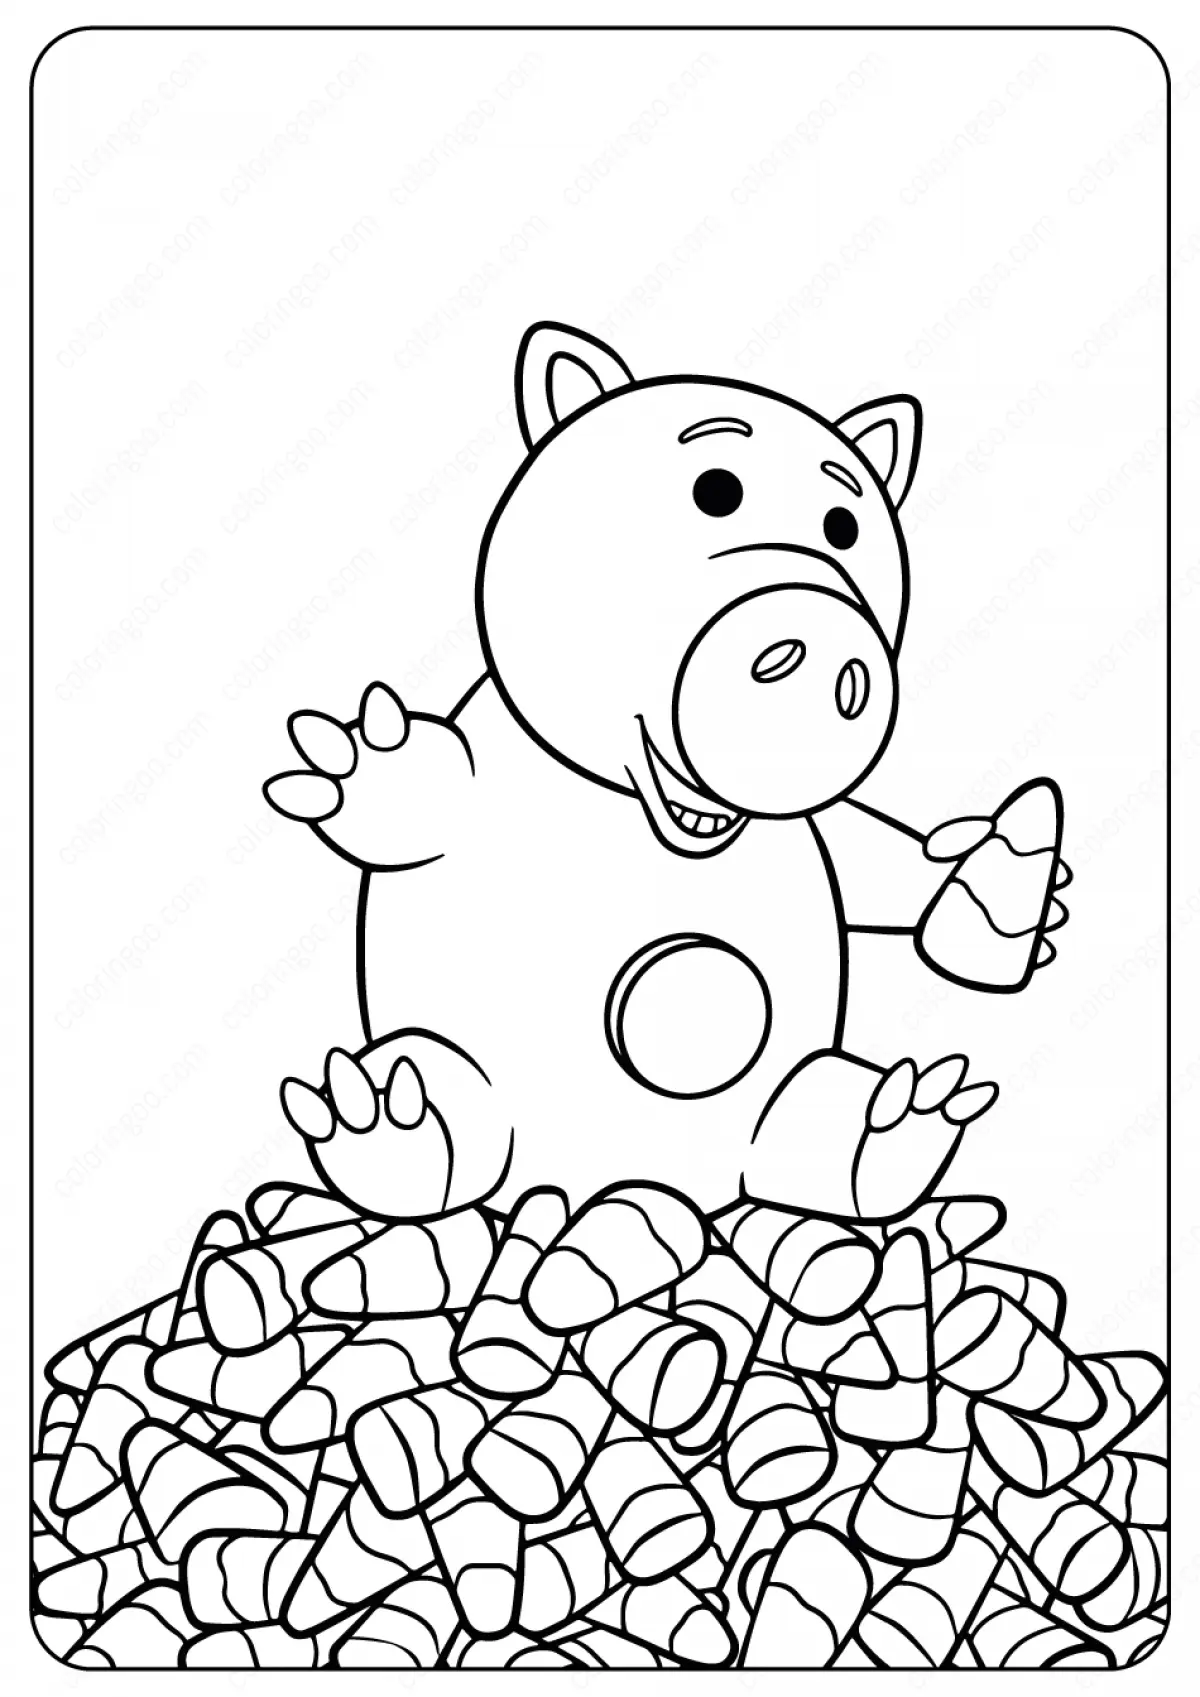 Toy Story Coloring Pages